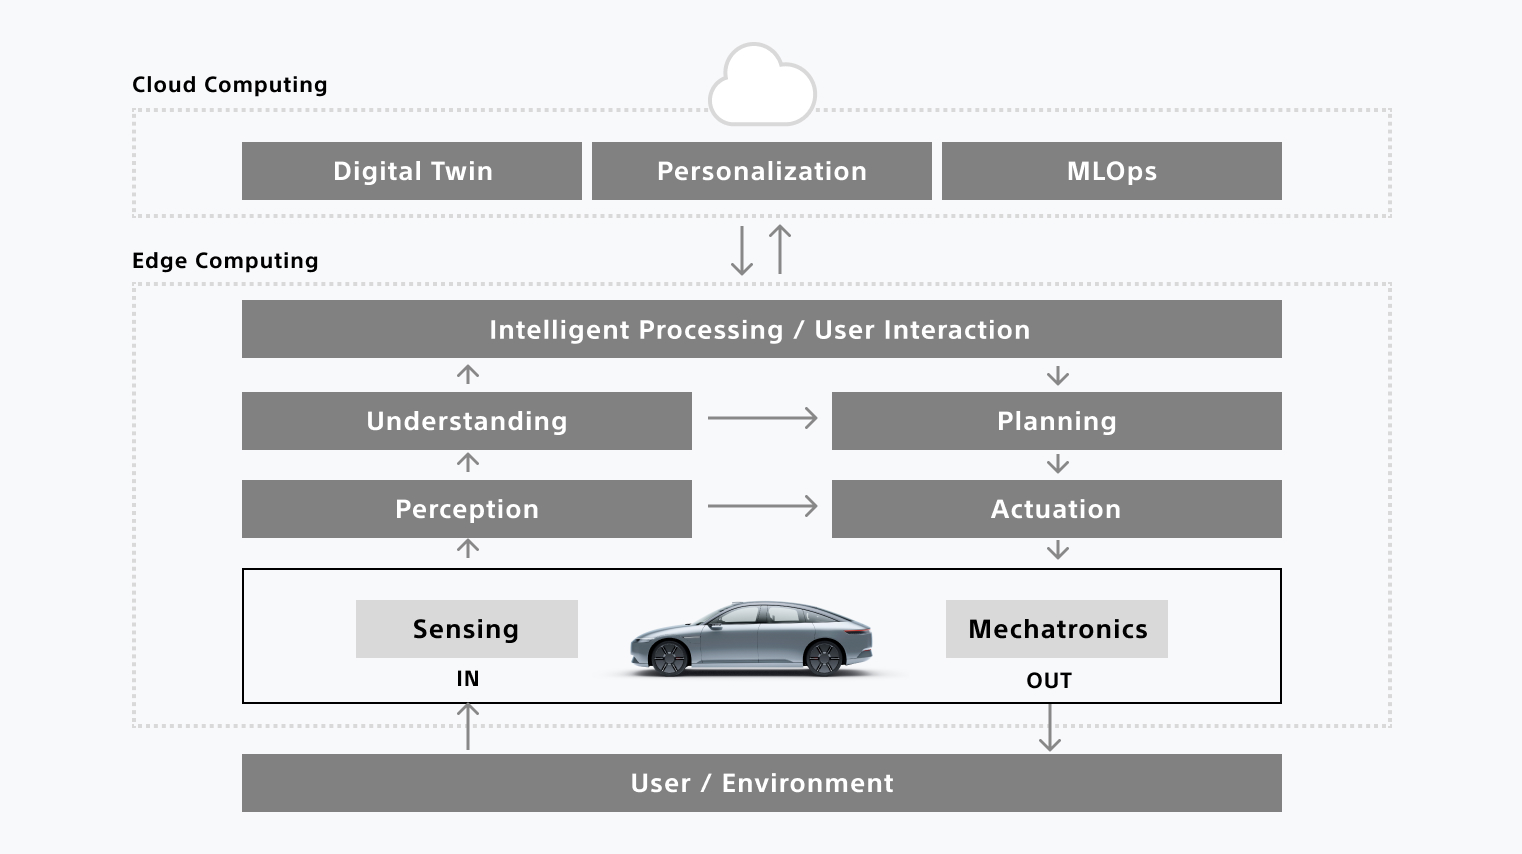 A chart that shows the concept of vehicle self-growth cycle based on sensing, computing and cloud technologies.